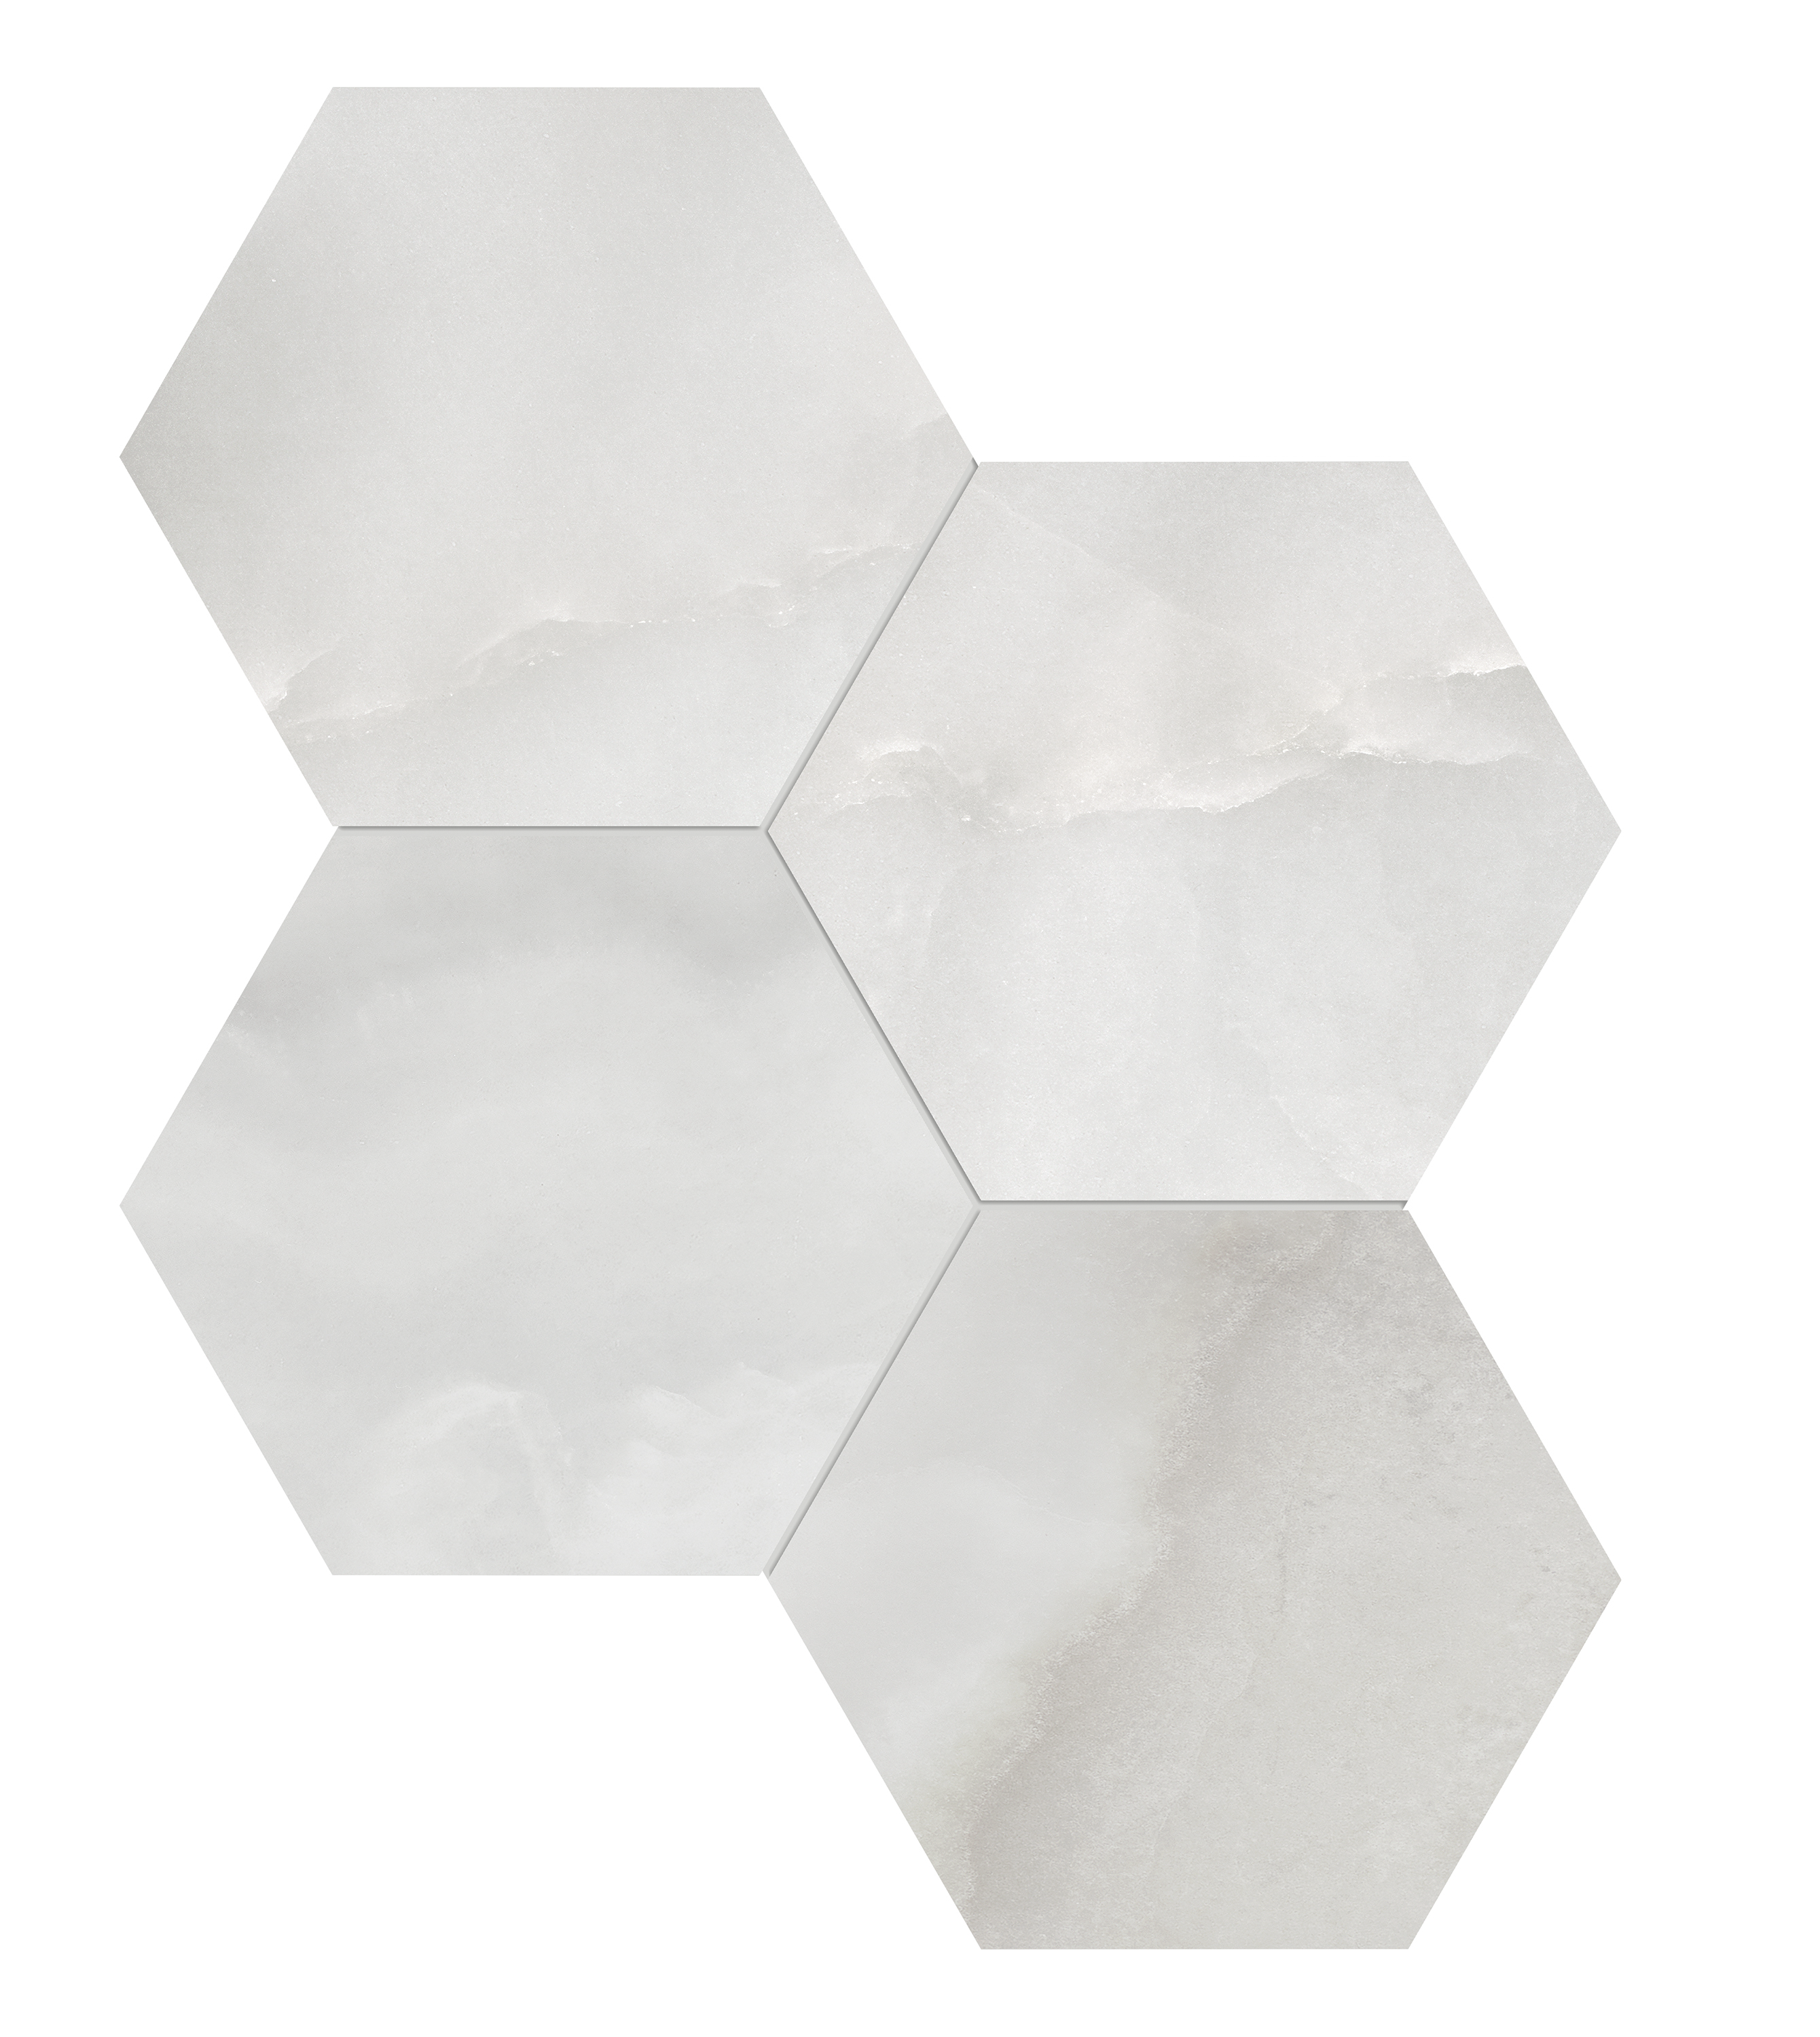 onyx nuvolato hexagon 6-inch pattern glazed porcelain mosaic from la marca anatolia collection distributed by surface group international honed finish straight edge edge mesh shape